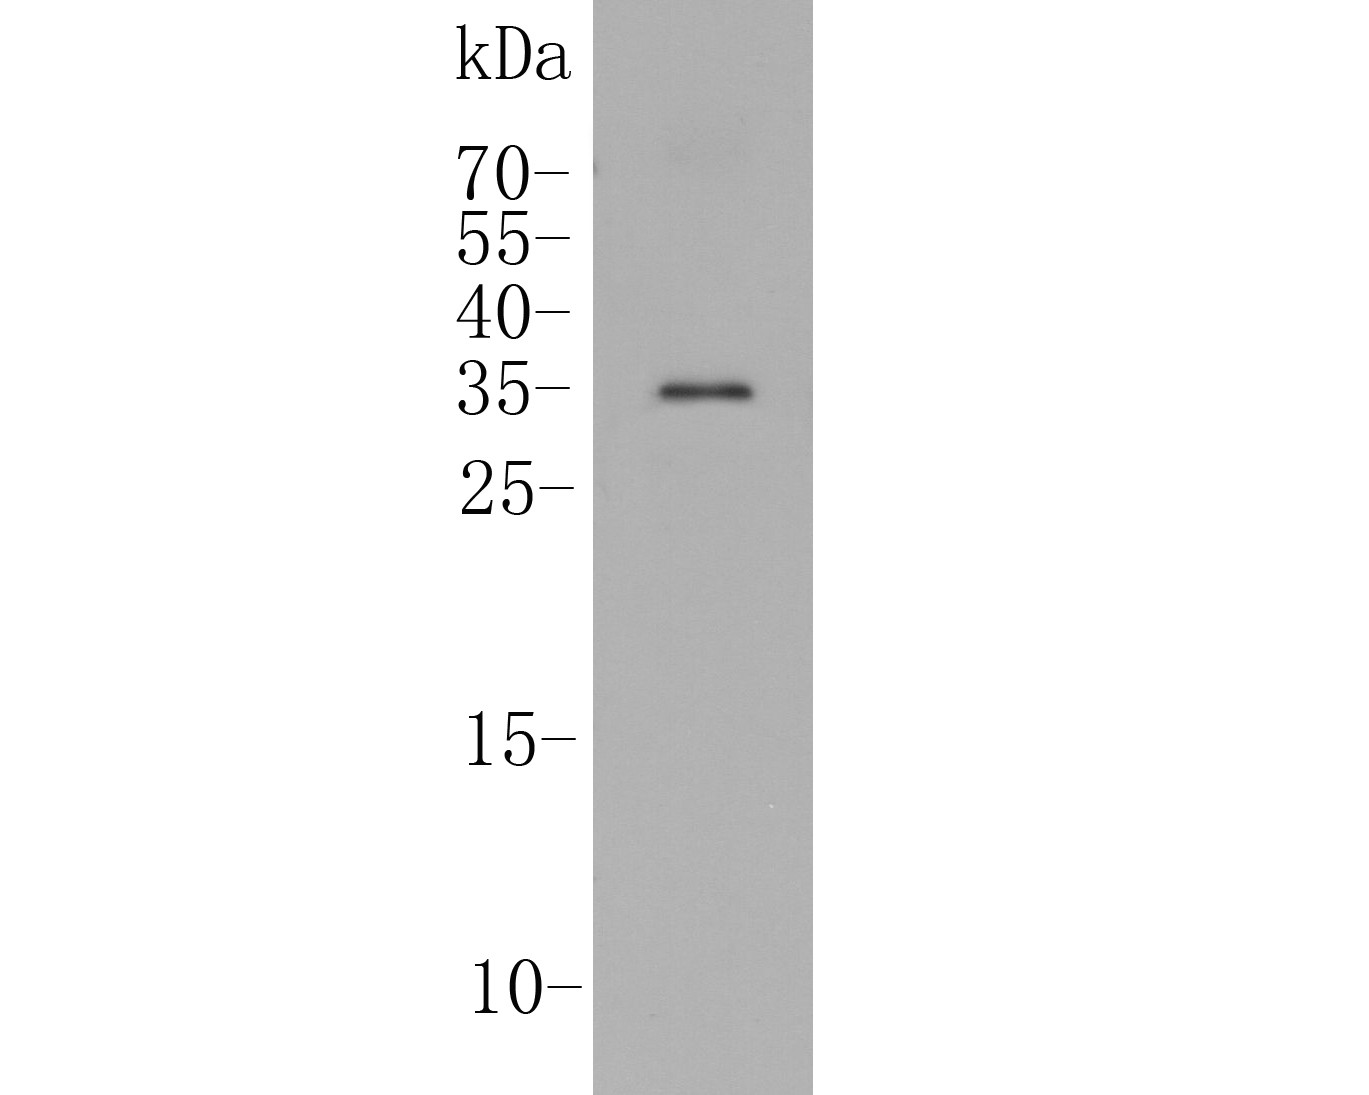 Western blot analysis of IL-17A on Rat stomach tissue lysate. Proteins were transferred to a PVDF membrane and blocked with 5% BSA in PBS for 1 hour at room temperature. The primary antibody (ER1902-37, 1/500) was used in 5% BSA at room temperature for 2 hours. Goat Anti-Rabbit IgG - HRP Secondary Antibody (HA1001) at 1:5,000 dilution was used for 1 hour at room temperature.